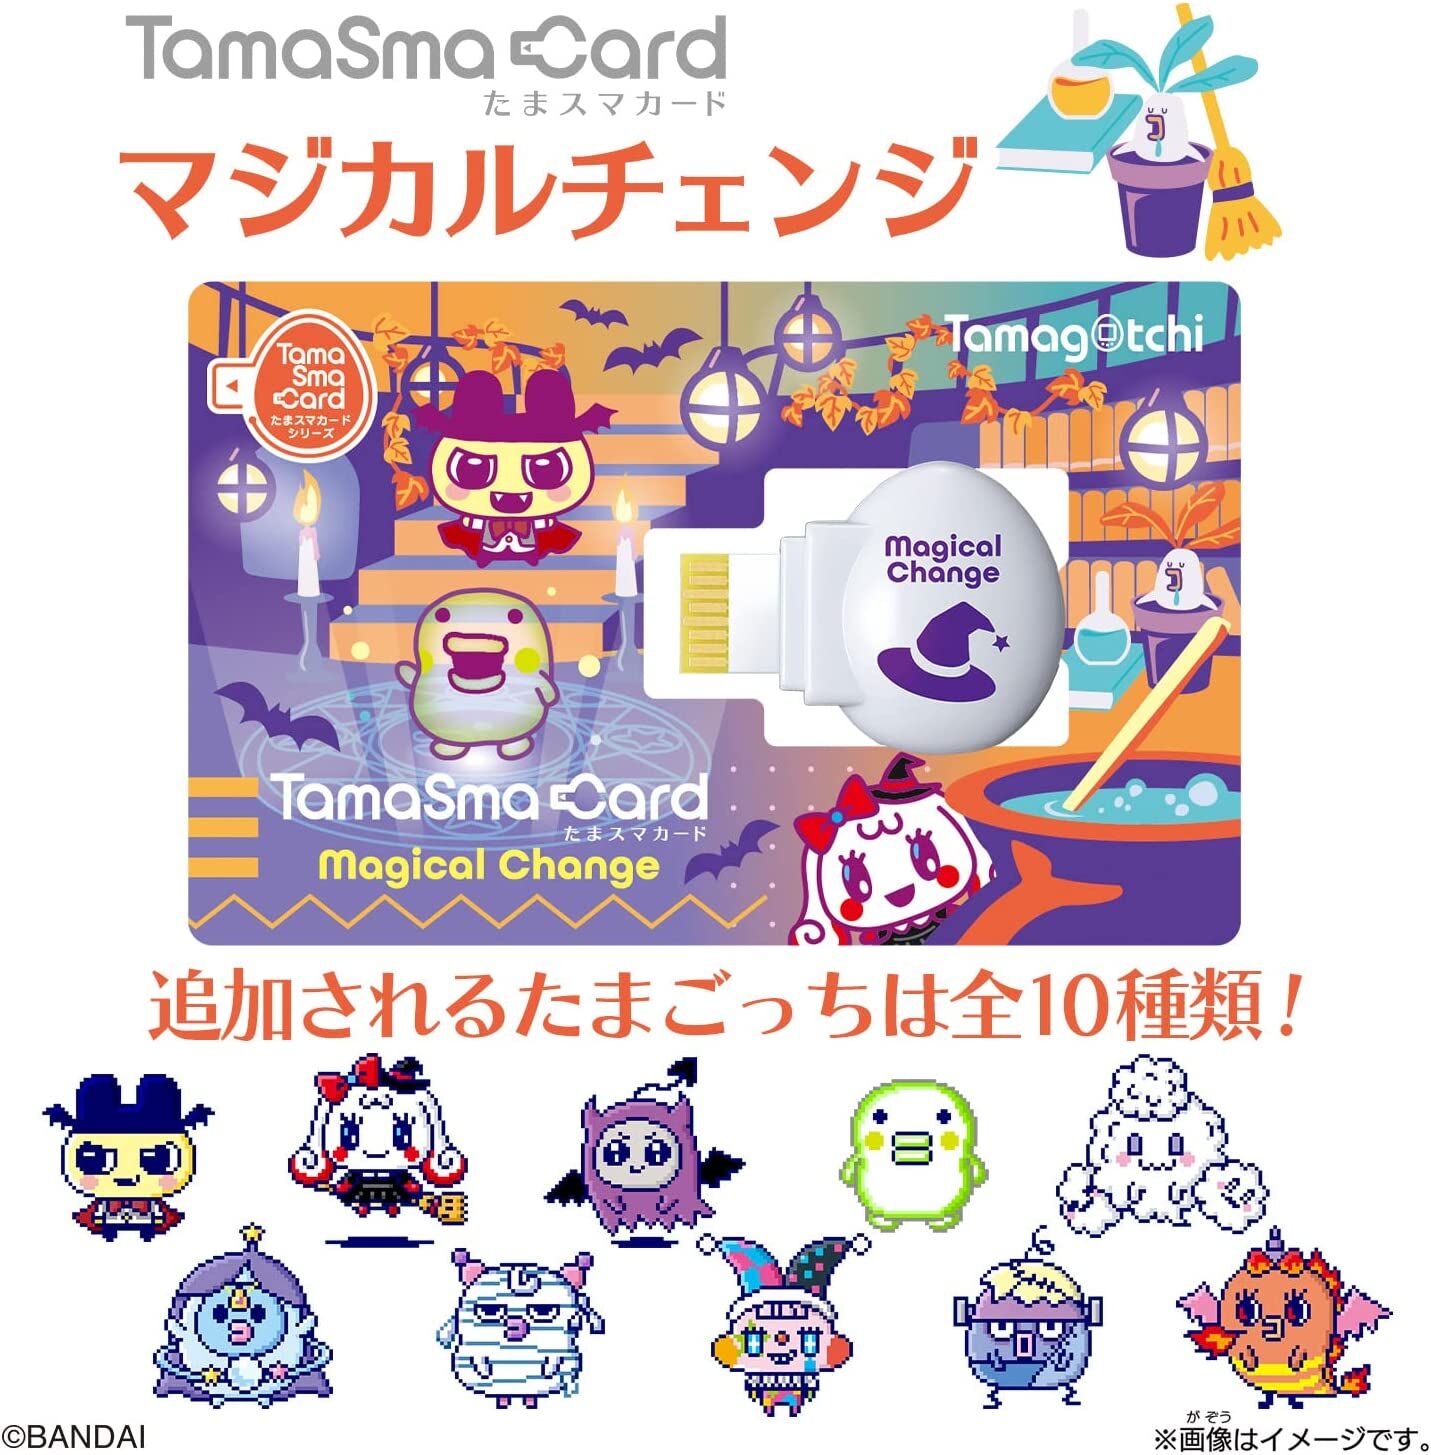 To celebrate the 25th Anniversary of Tamagotchi, Bandai has posted a  picture showing most of the Tamagotchi releases : r/tamagotchi